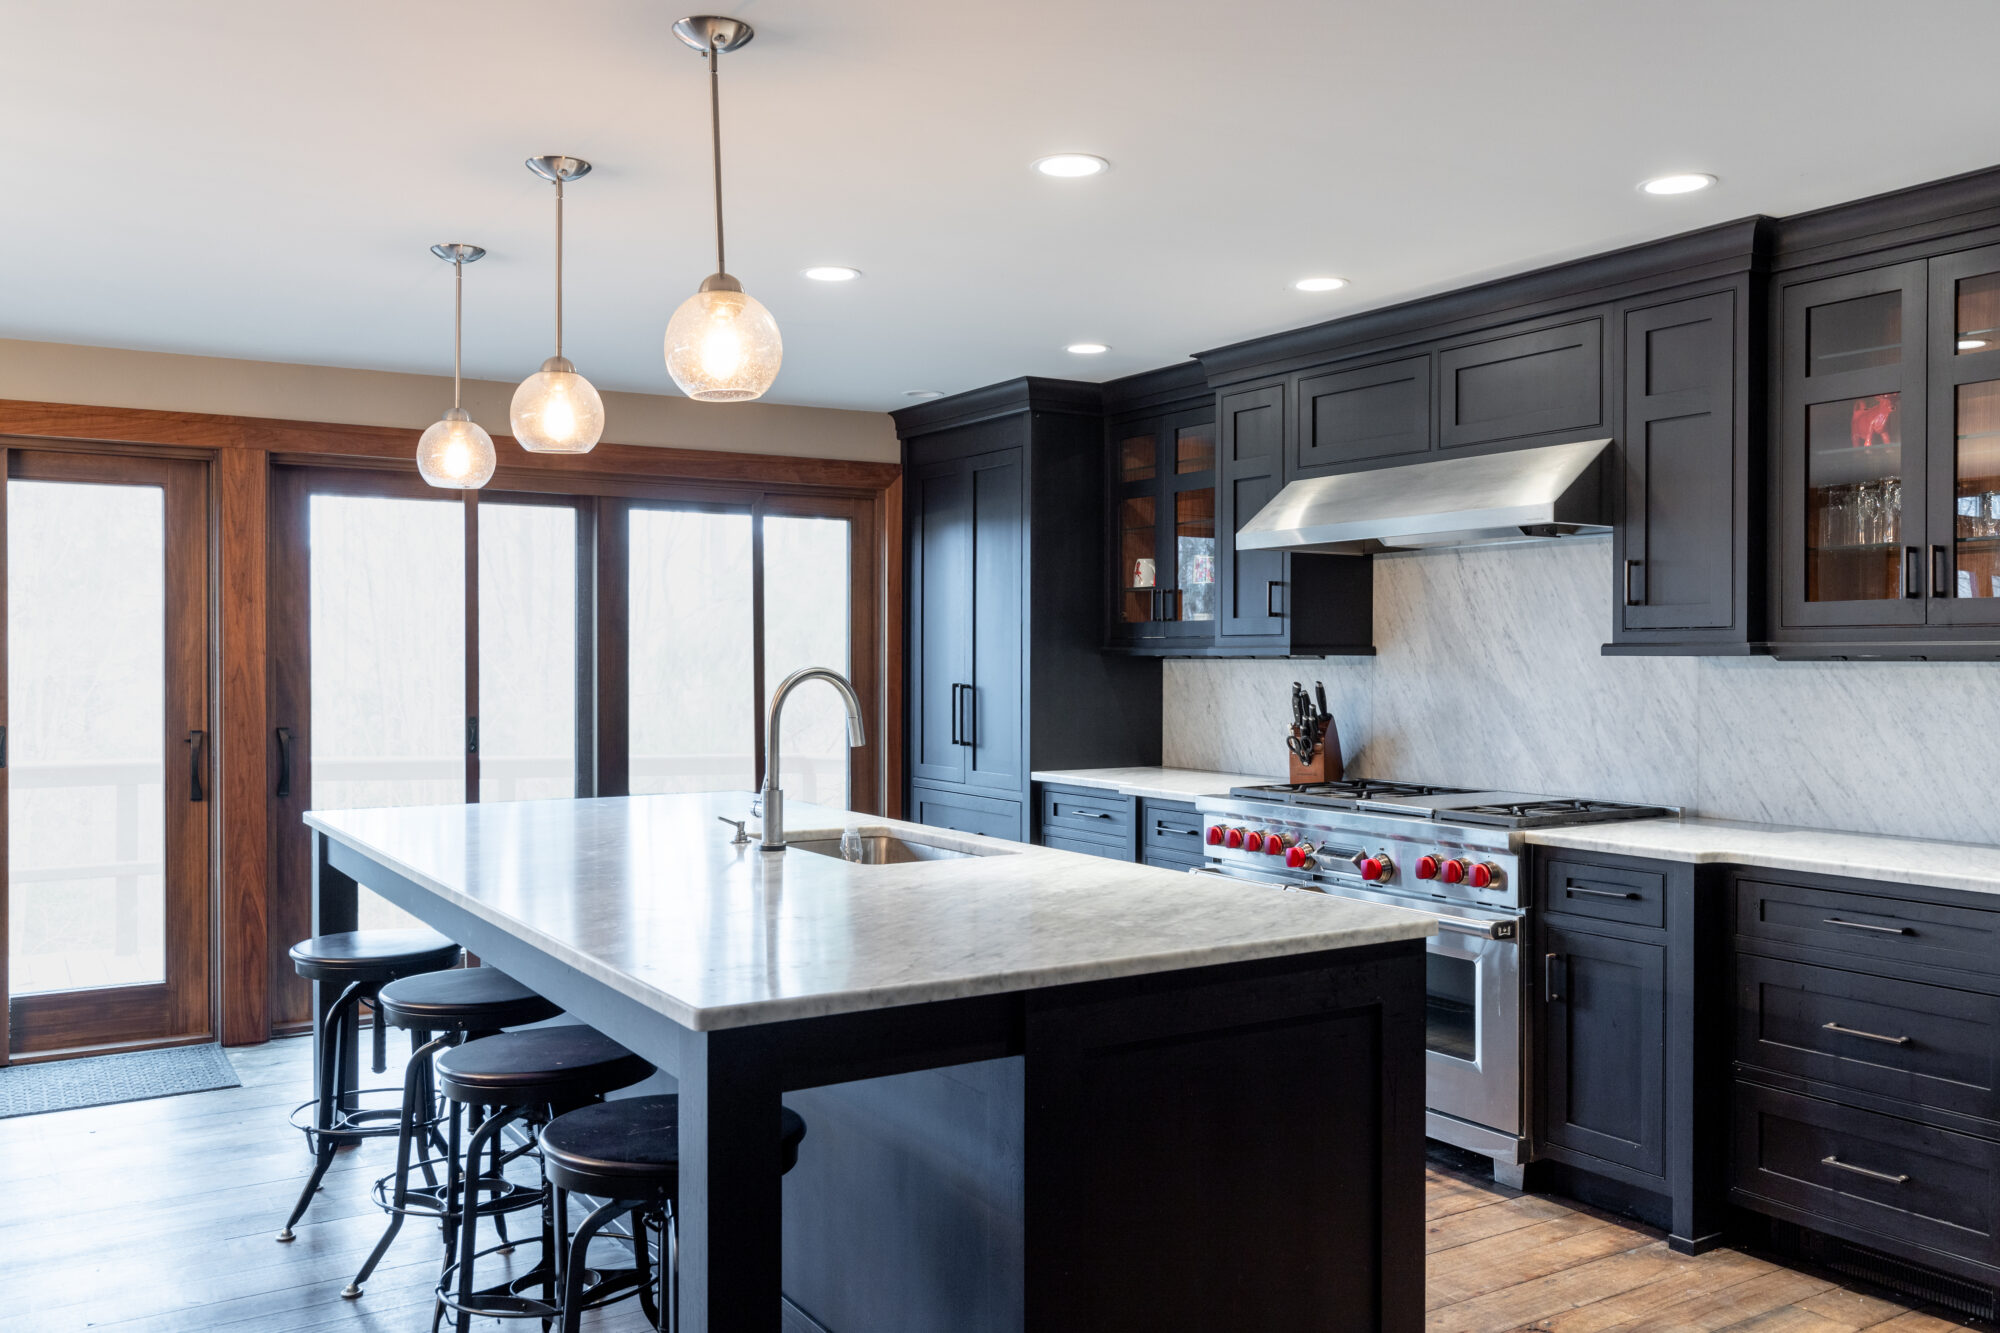 Stylish and functional kitchen in a residential renovation project, showcasing a central island with bar seating and sink, state-of-the-art two-door oven and range, rich dark custom cabinetry, and contrasting light-colored countertops, expertly designed by R.E. McNamara Inc.